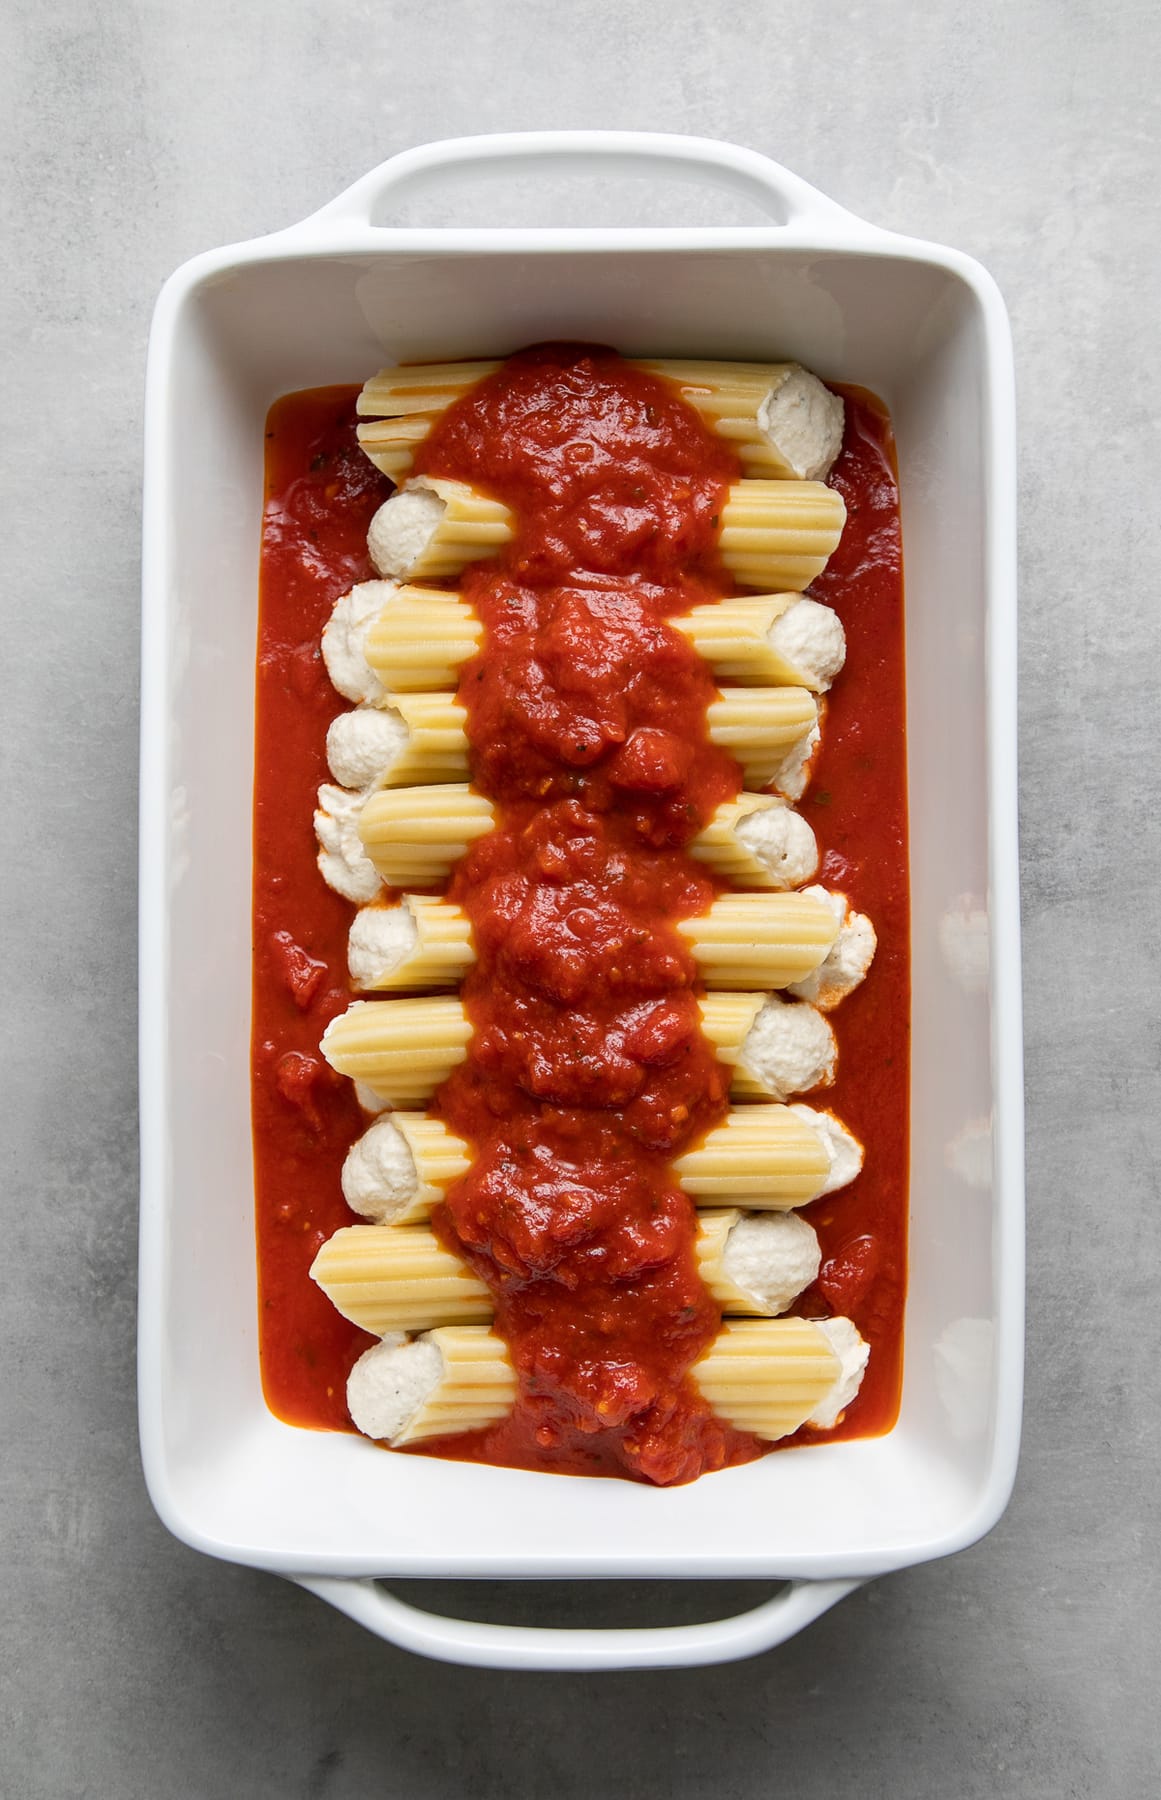 top down view of prepped vegan manicotti in a rectangular baking dish before putting in the oven.